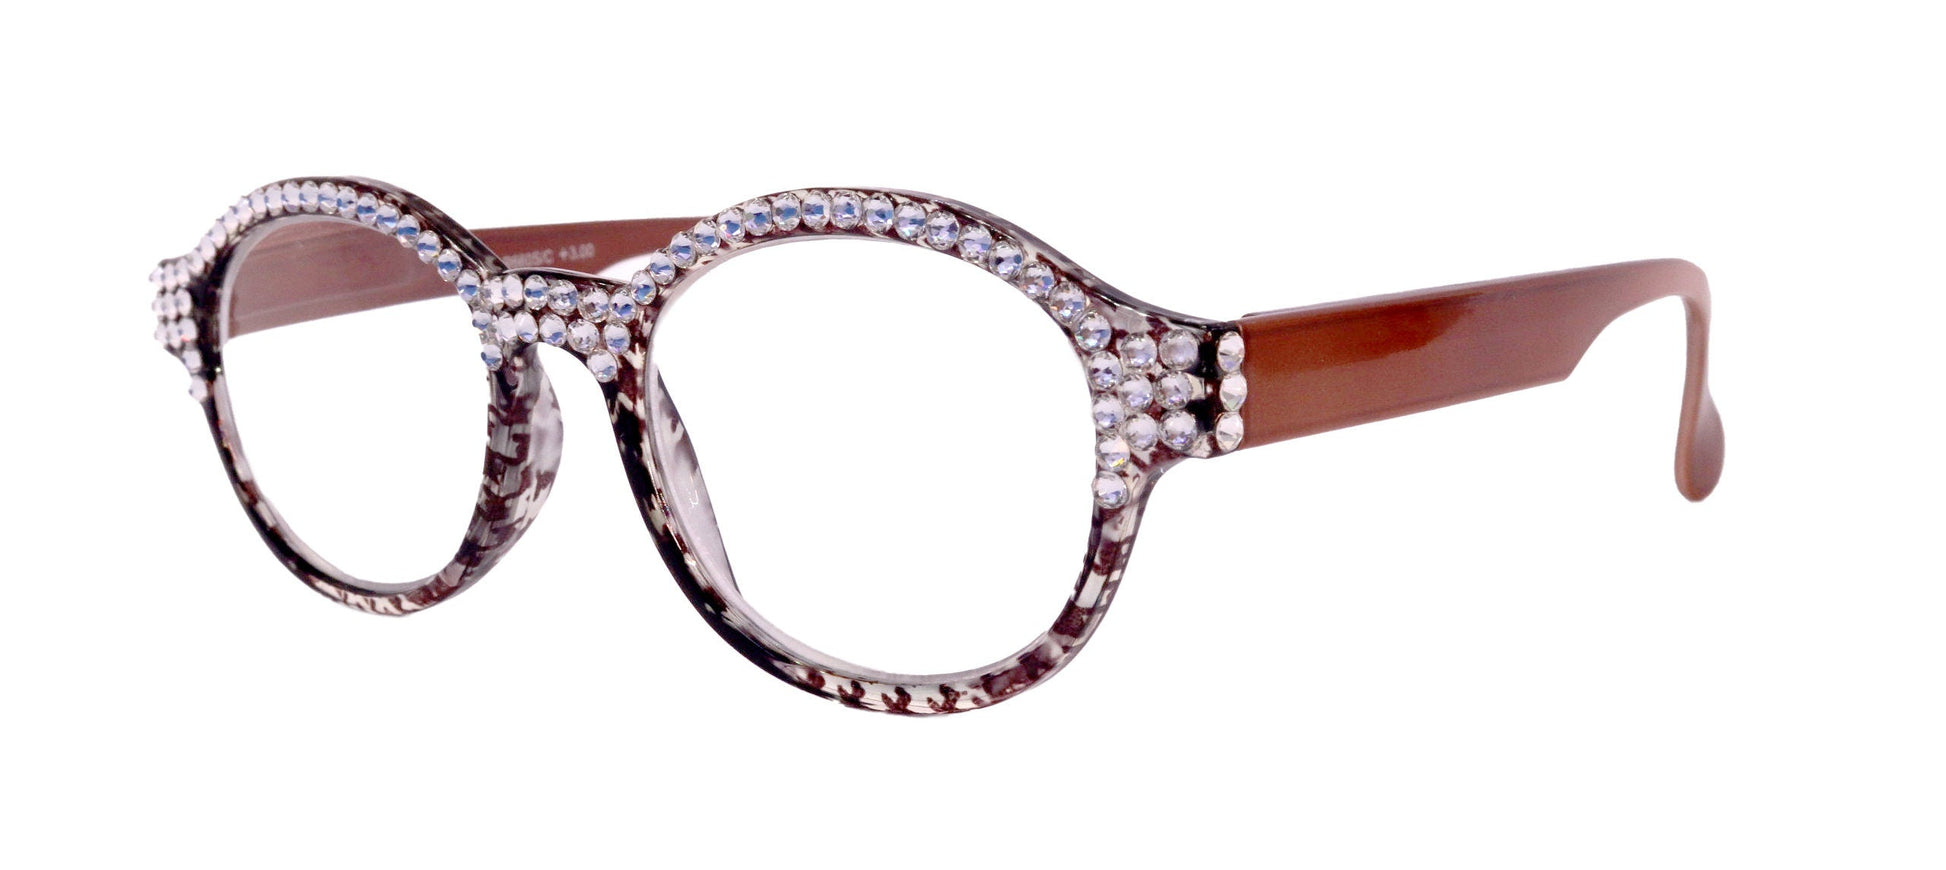 The Alchemist, (Bling) Round Women Reading Glasses W (Full TOP) (Clear) Genuine European Crystals (Hound tooth, Brown) NY Fifth Avenue 